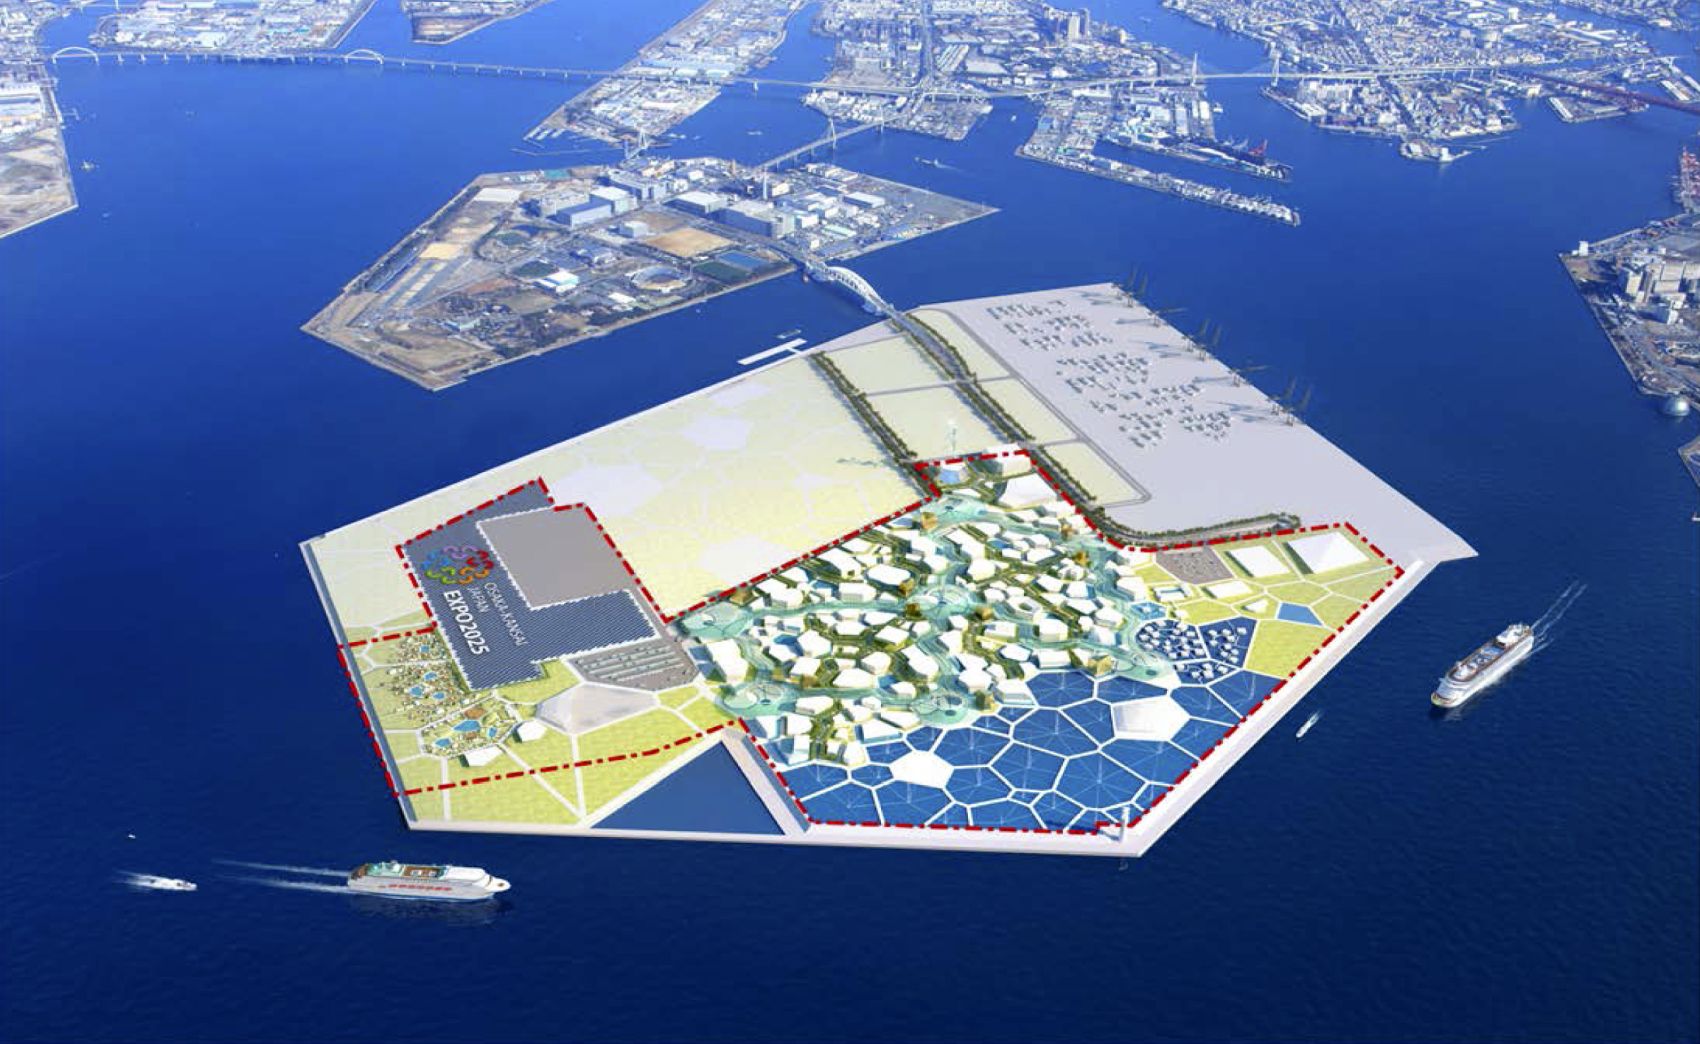 World Expo 2025: Here’s How Osaka Will Bring Back the Crowds